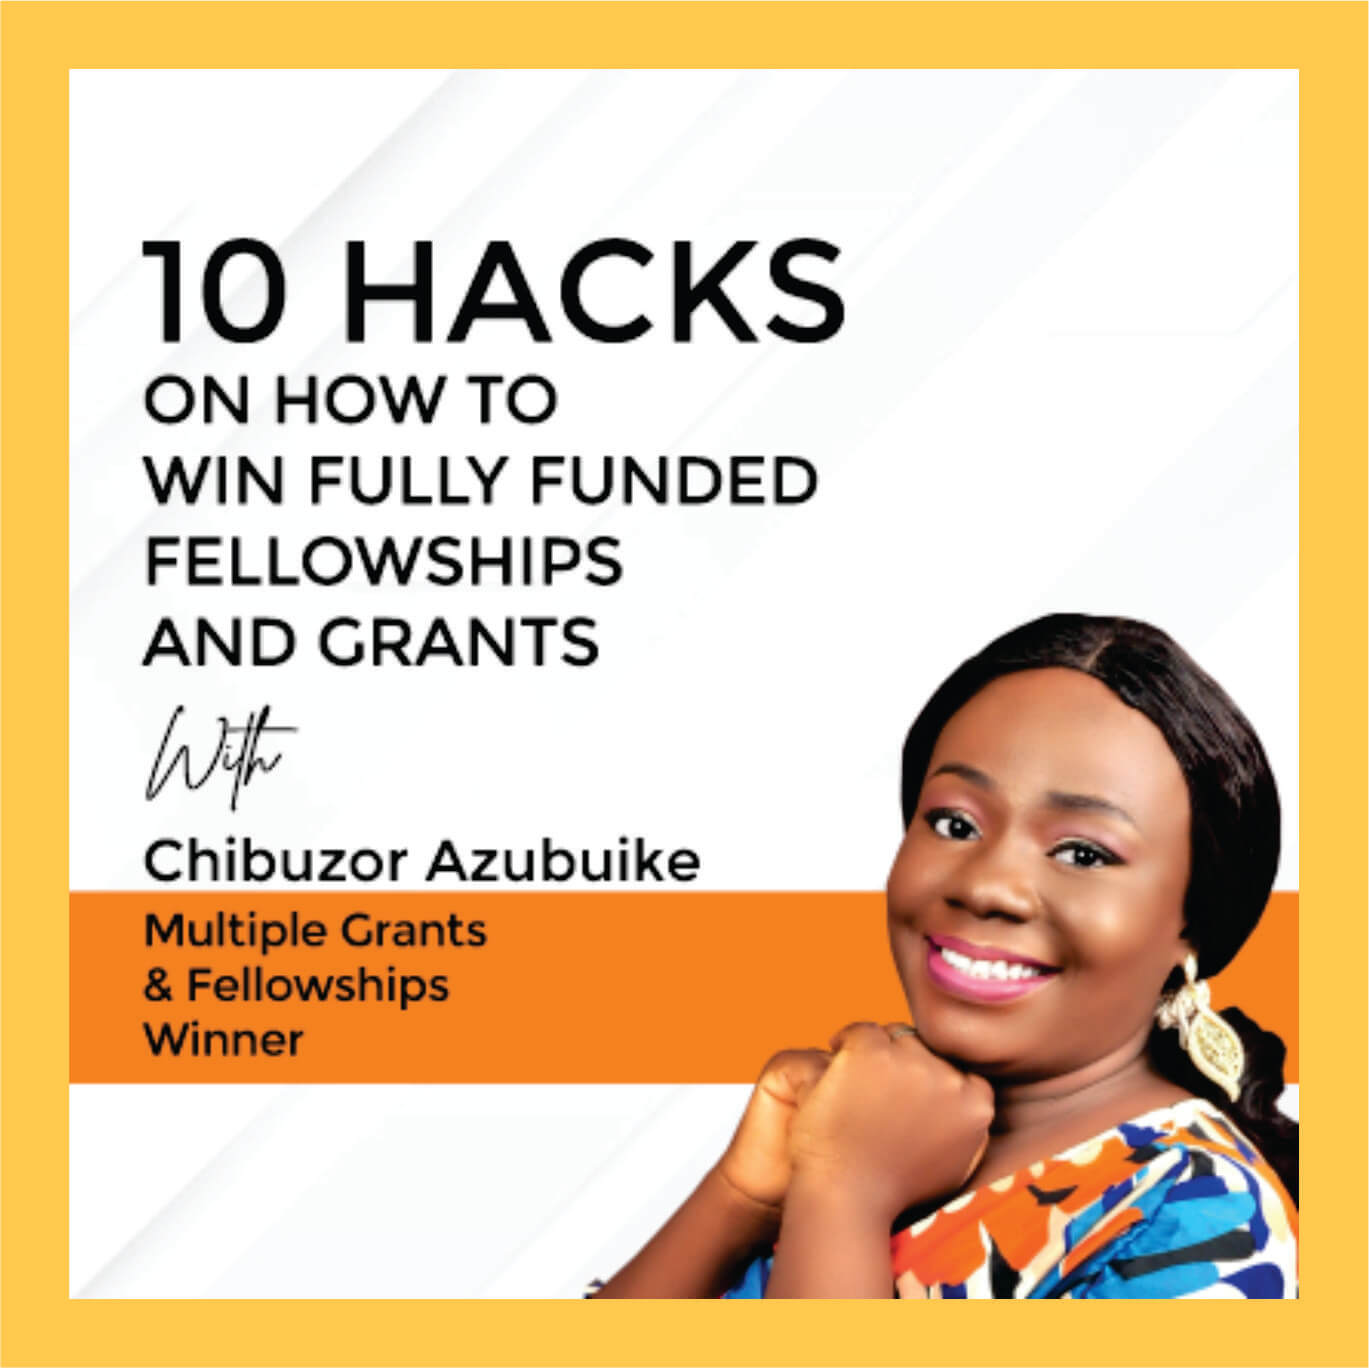 10 Hacks on How To Win Fully Funded Fellowships and Grants